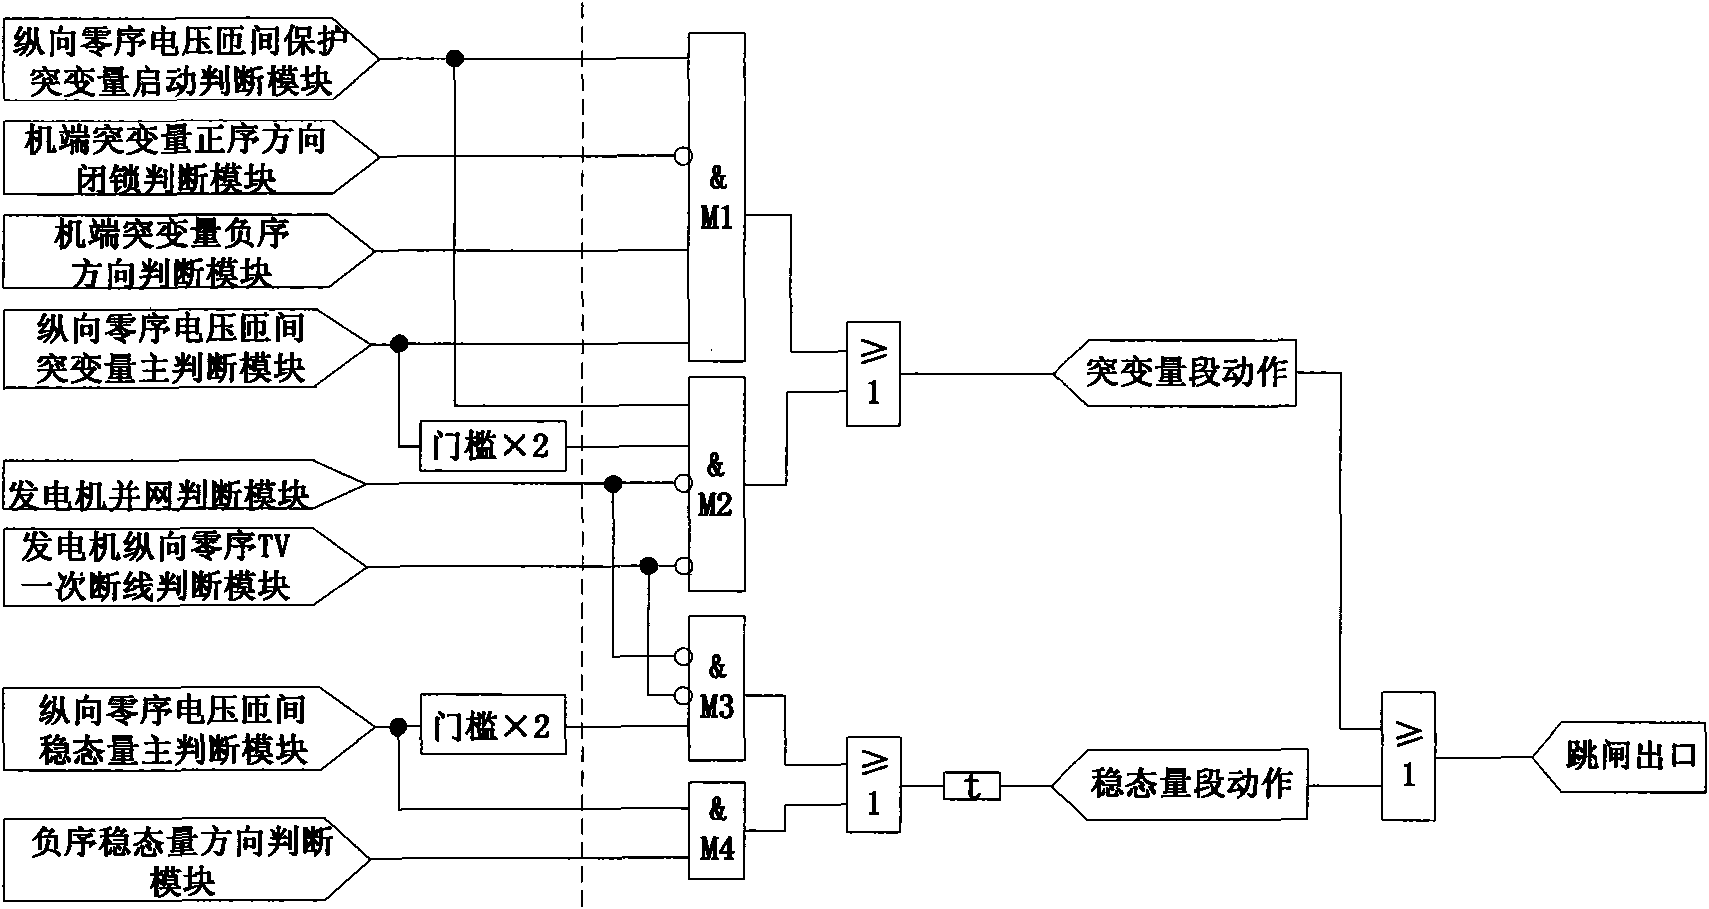 Inter-turn protection method for power generator